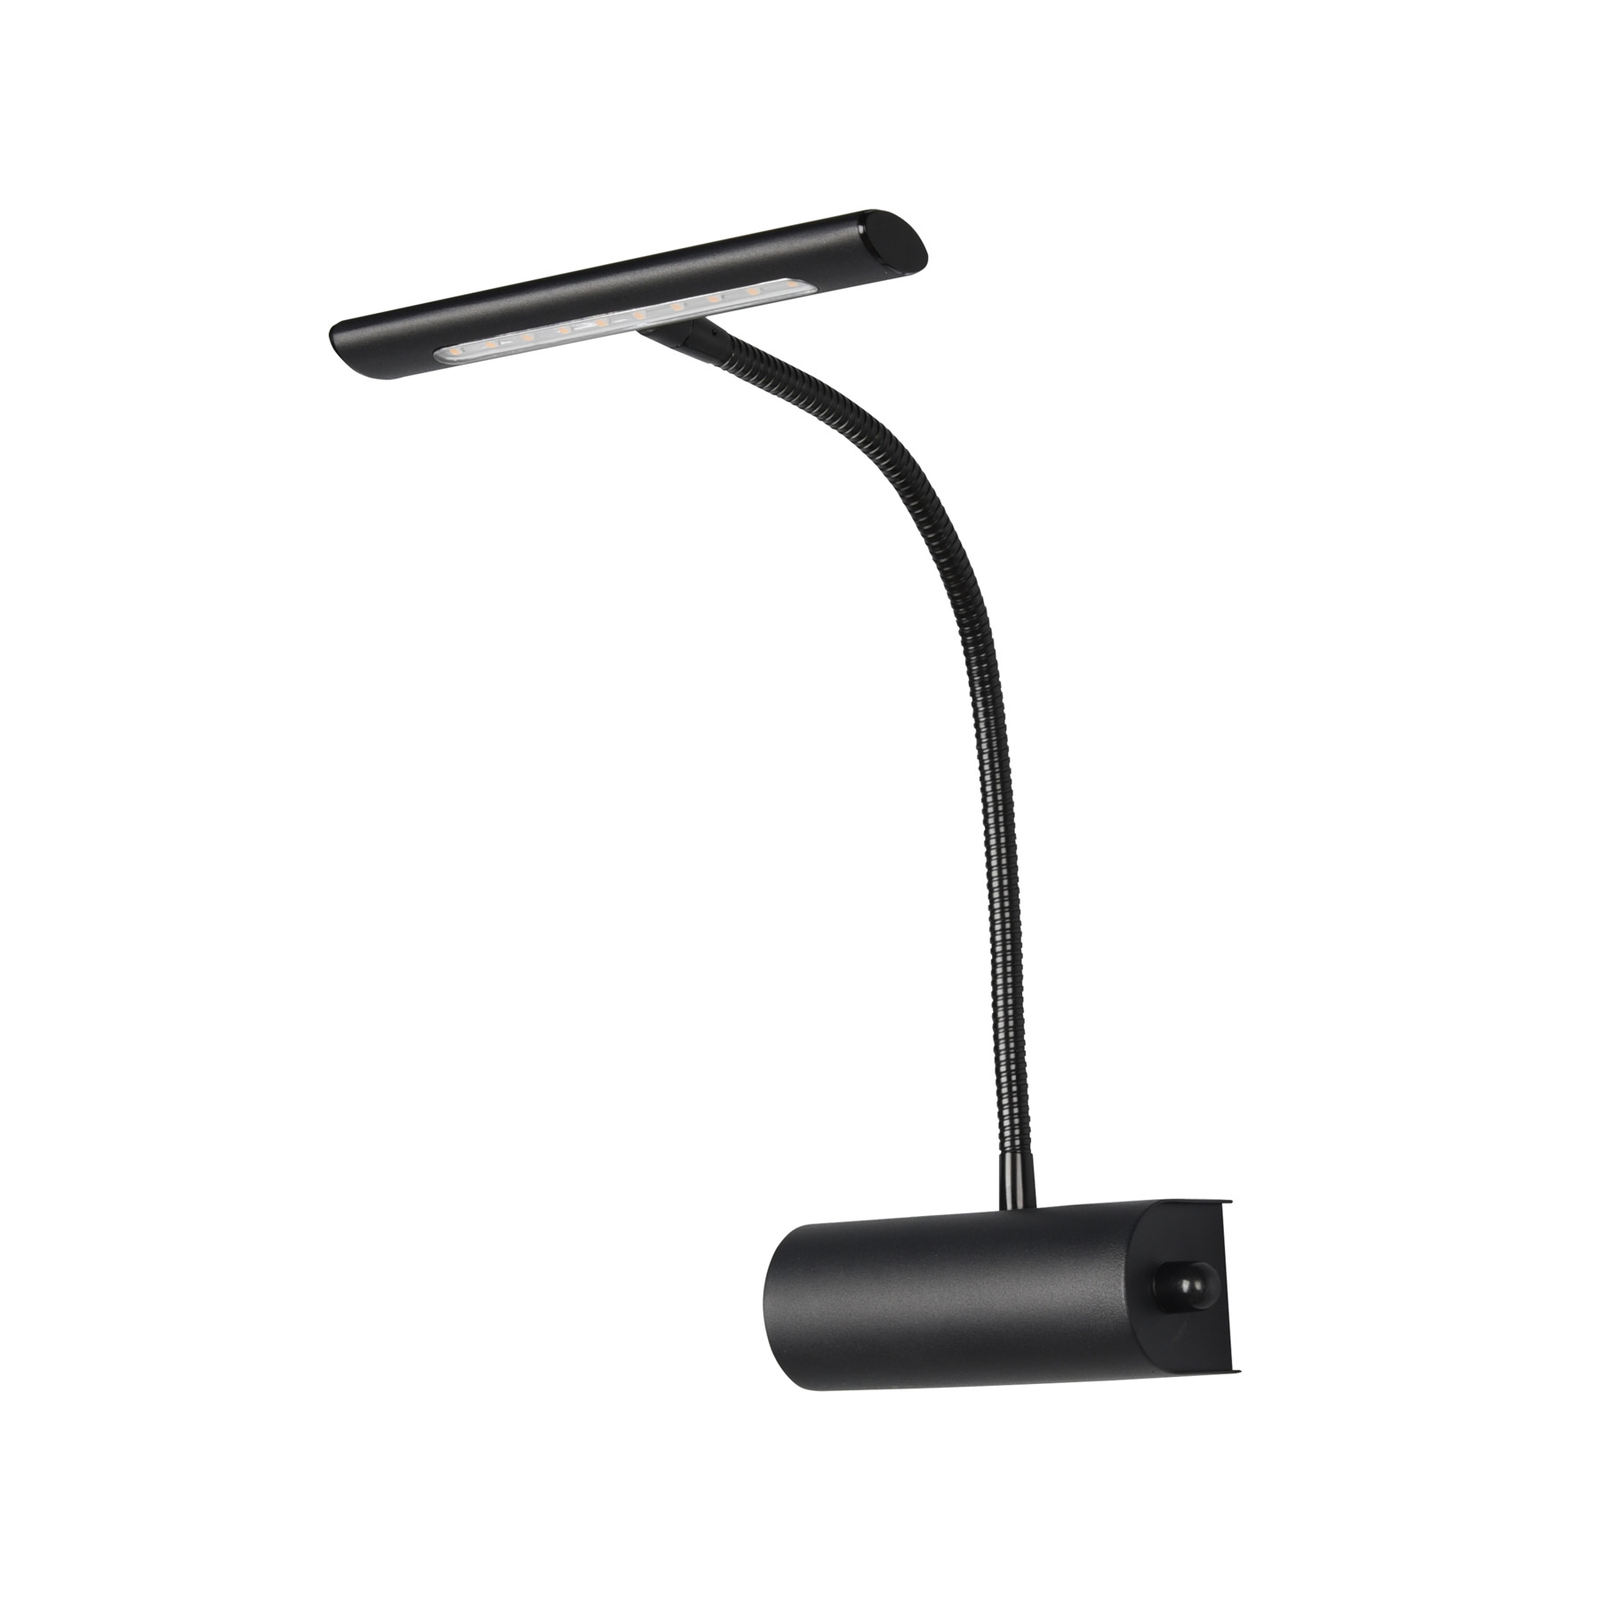 Curtis wall light with flex arm, dimmable, black